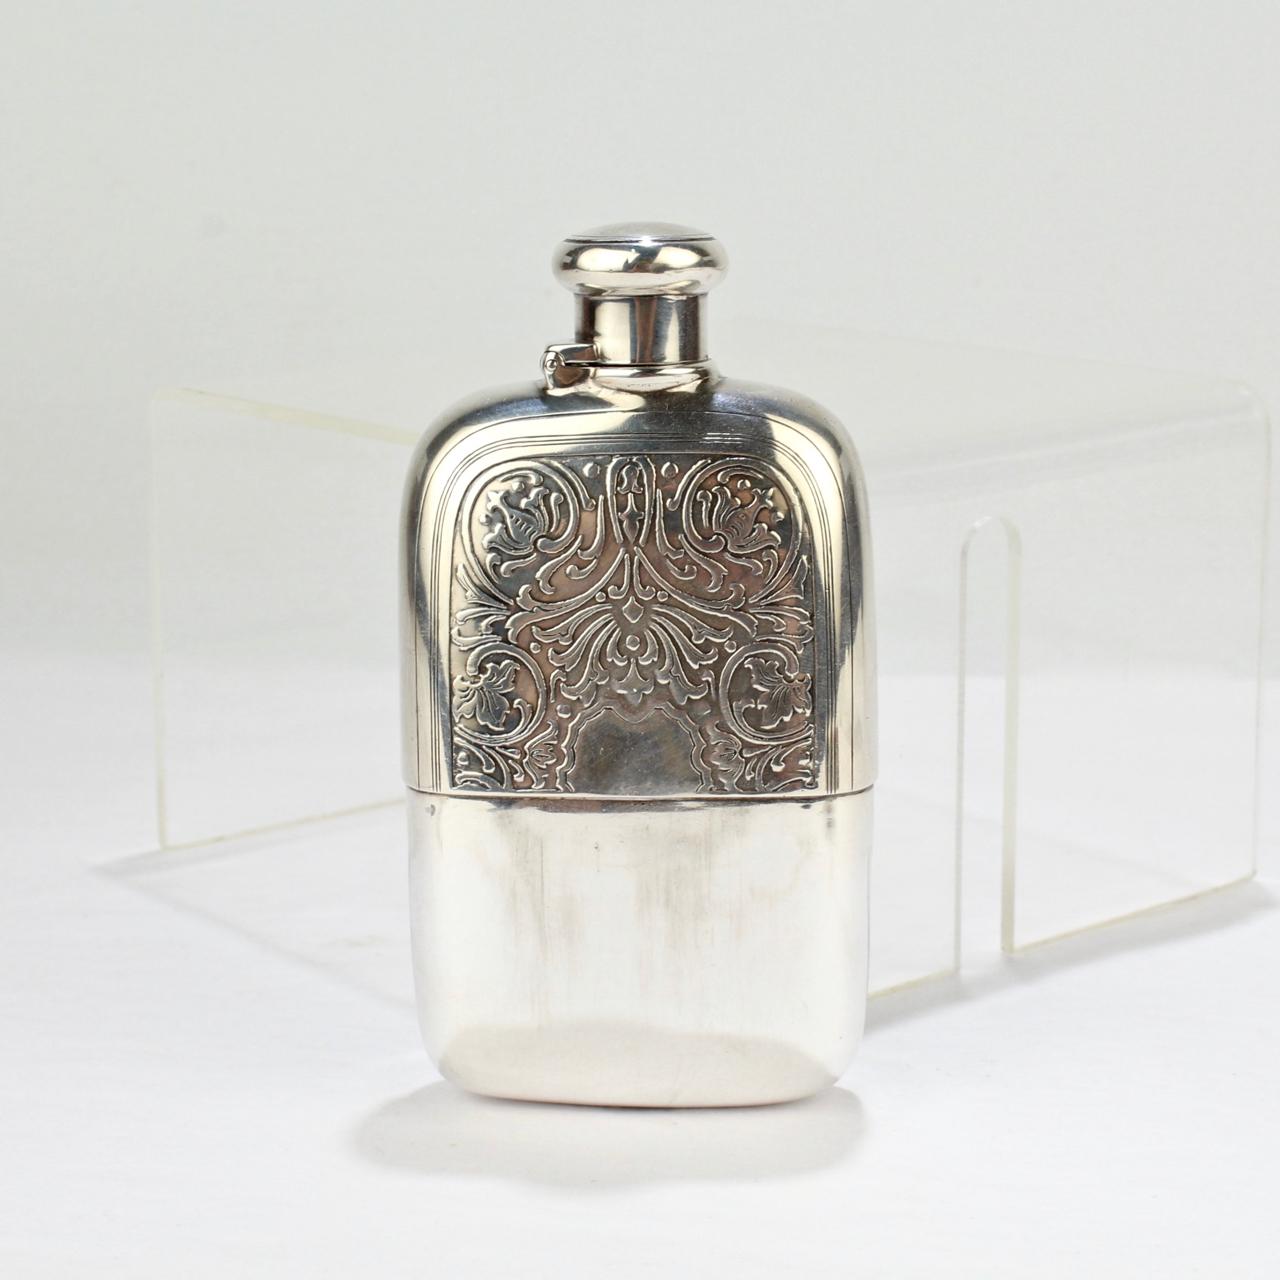 Antique Tiffany & Co. Sterling Silver Whiskey or Liquor Hip Flask 1